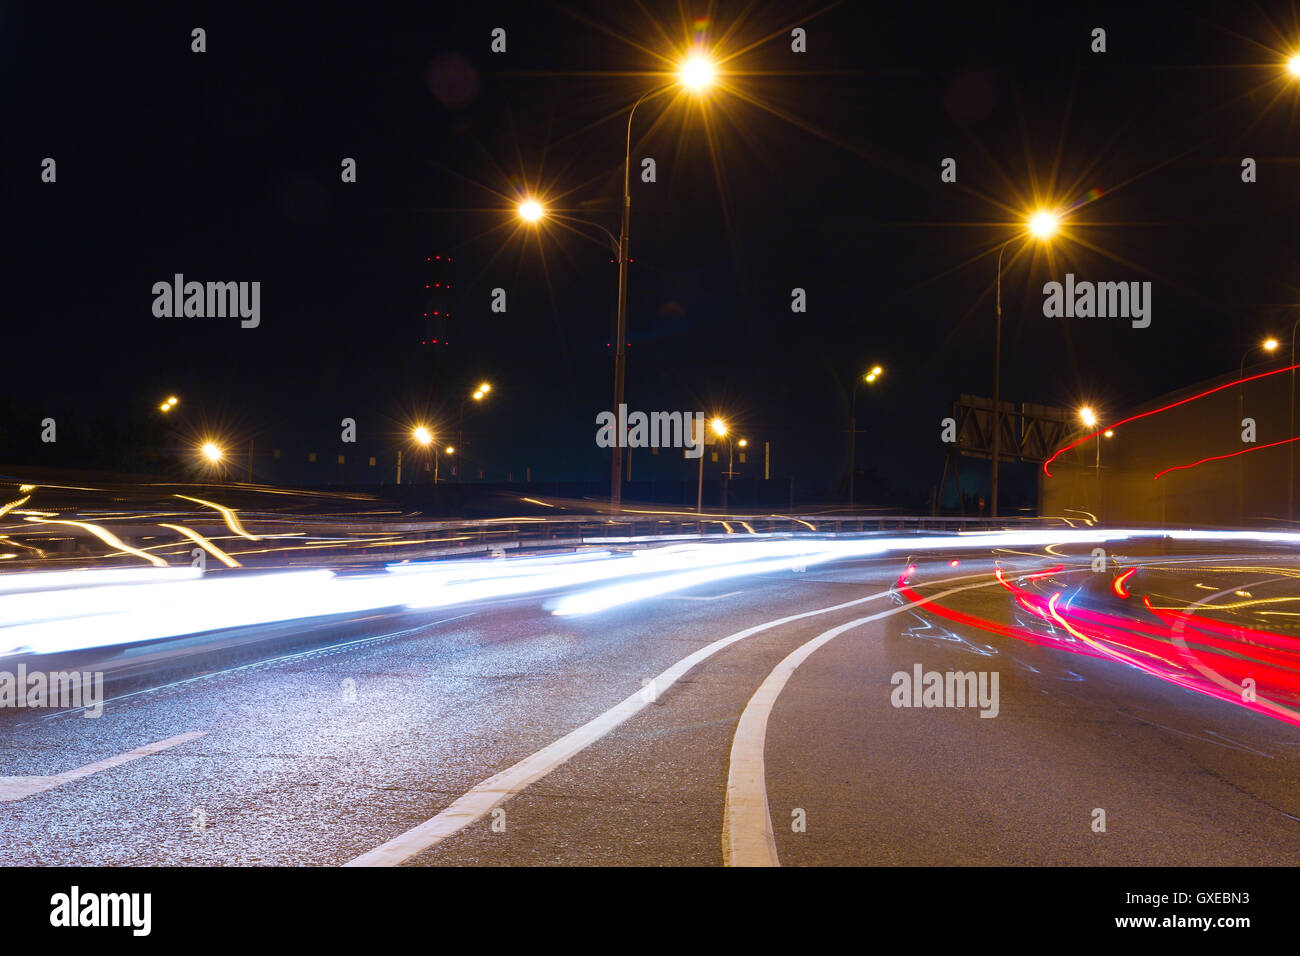 Abstract urban background with night traffic light pattern. Stock Photo